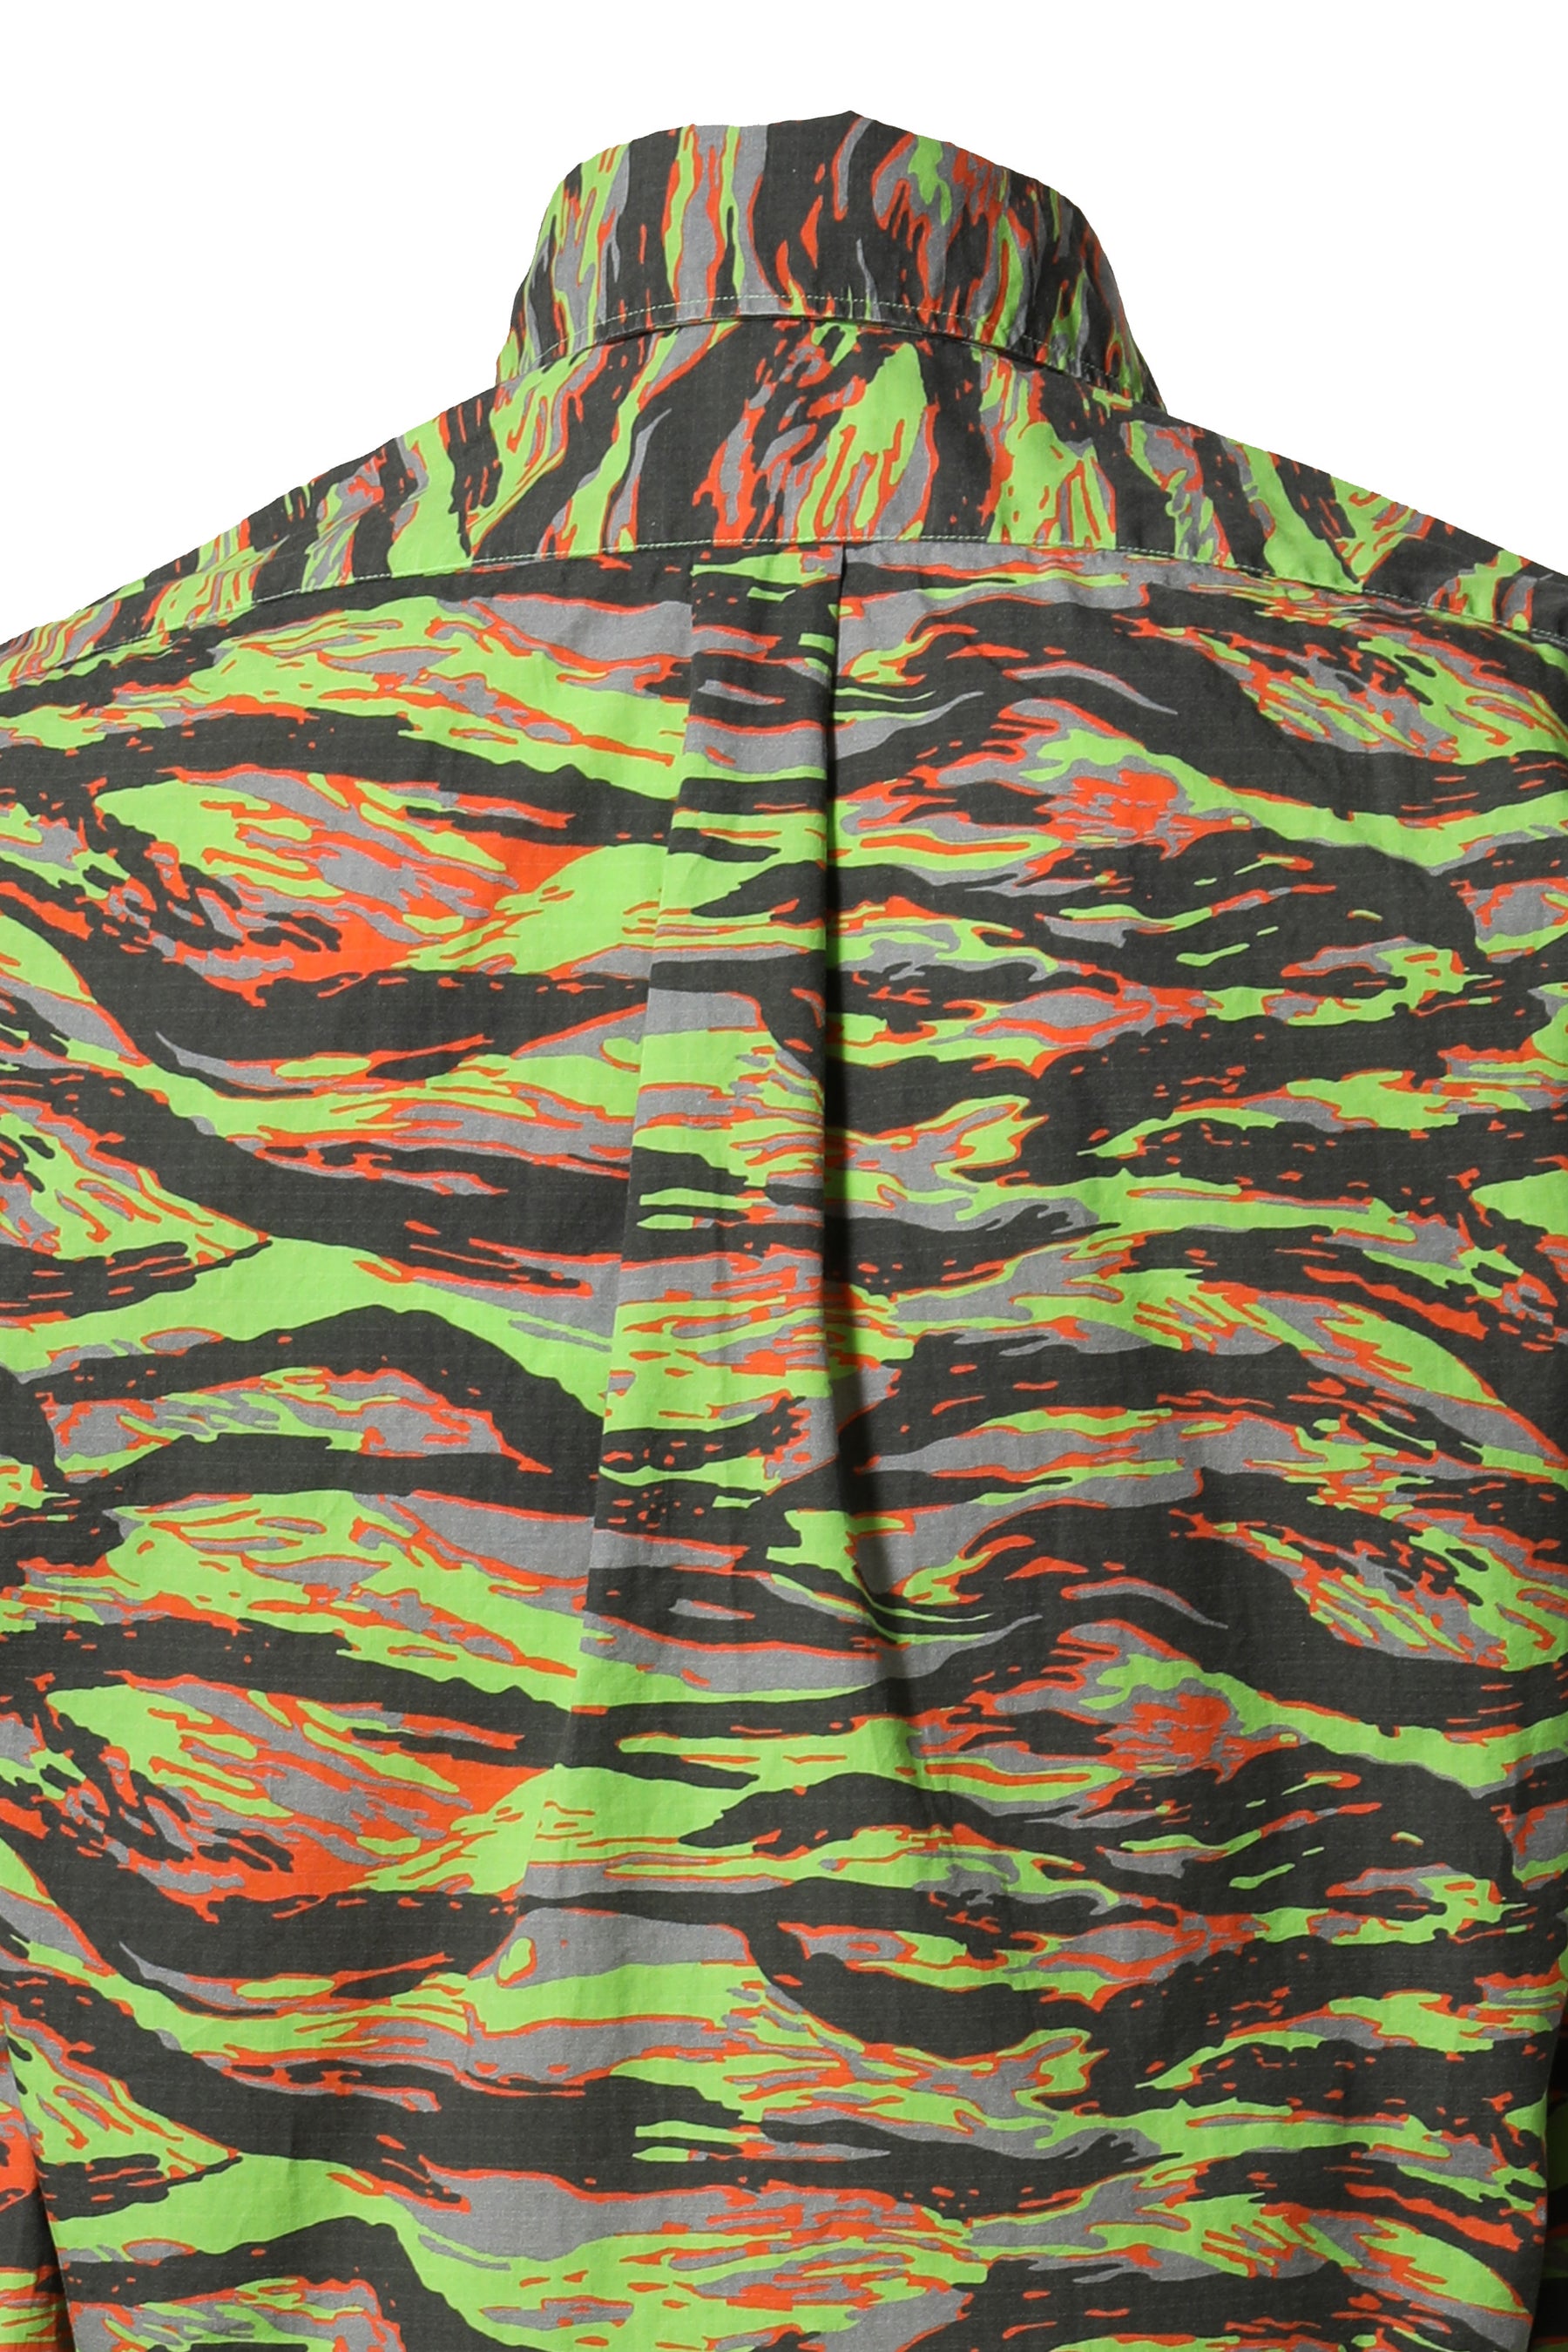 ERL PRINTED SHIRT WOVEN / ERL GRN RAVE CAMO